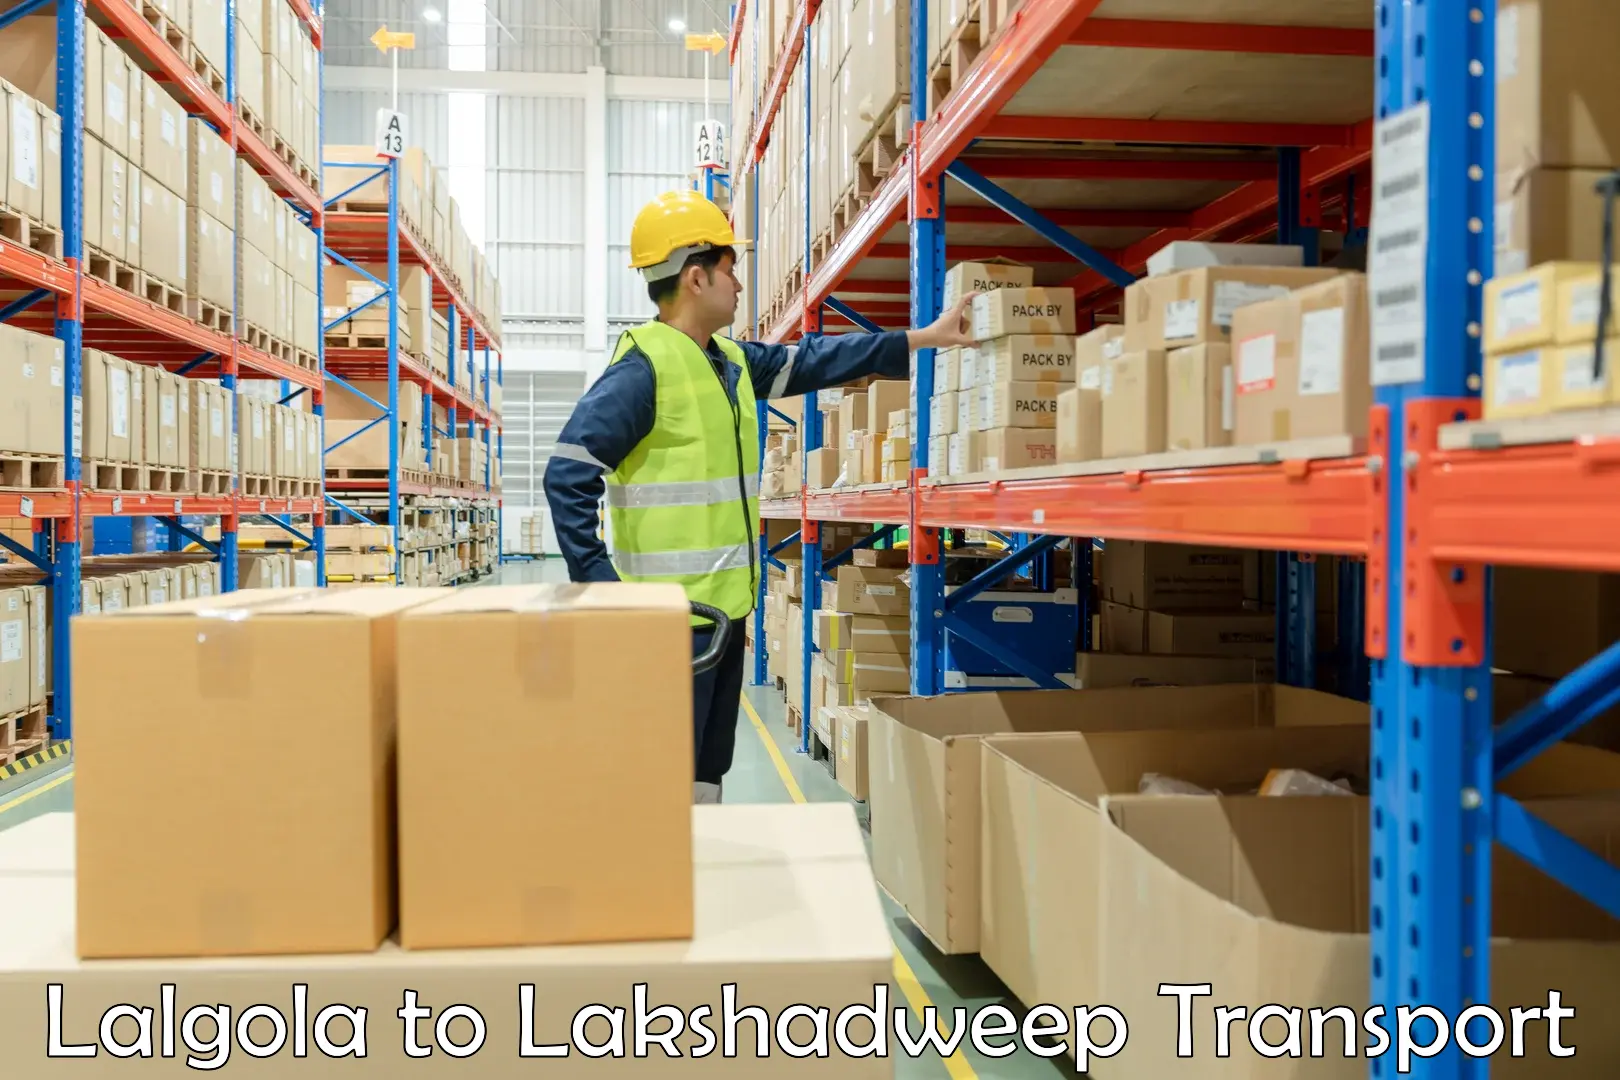 Transport shared services in Lalgola to Lakshadweep